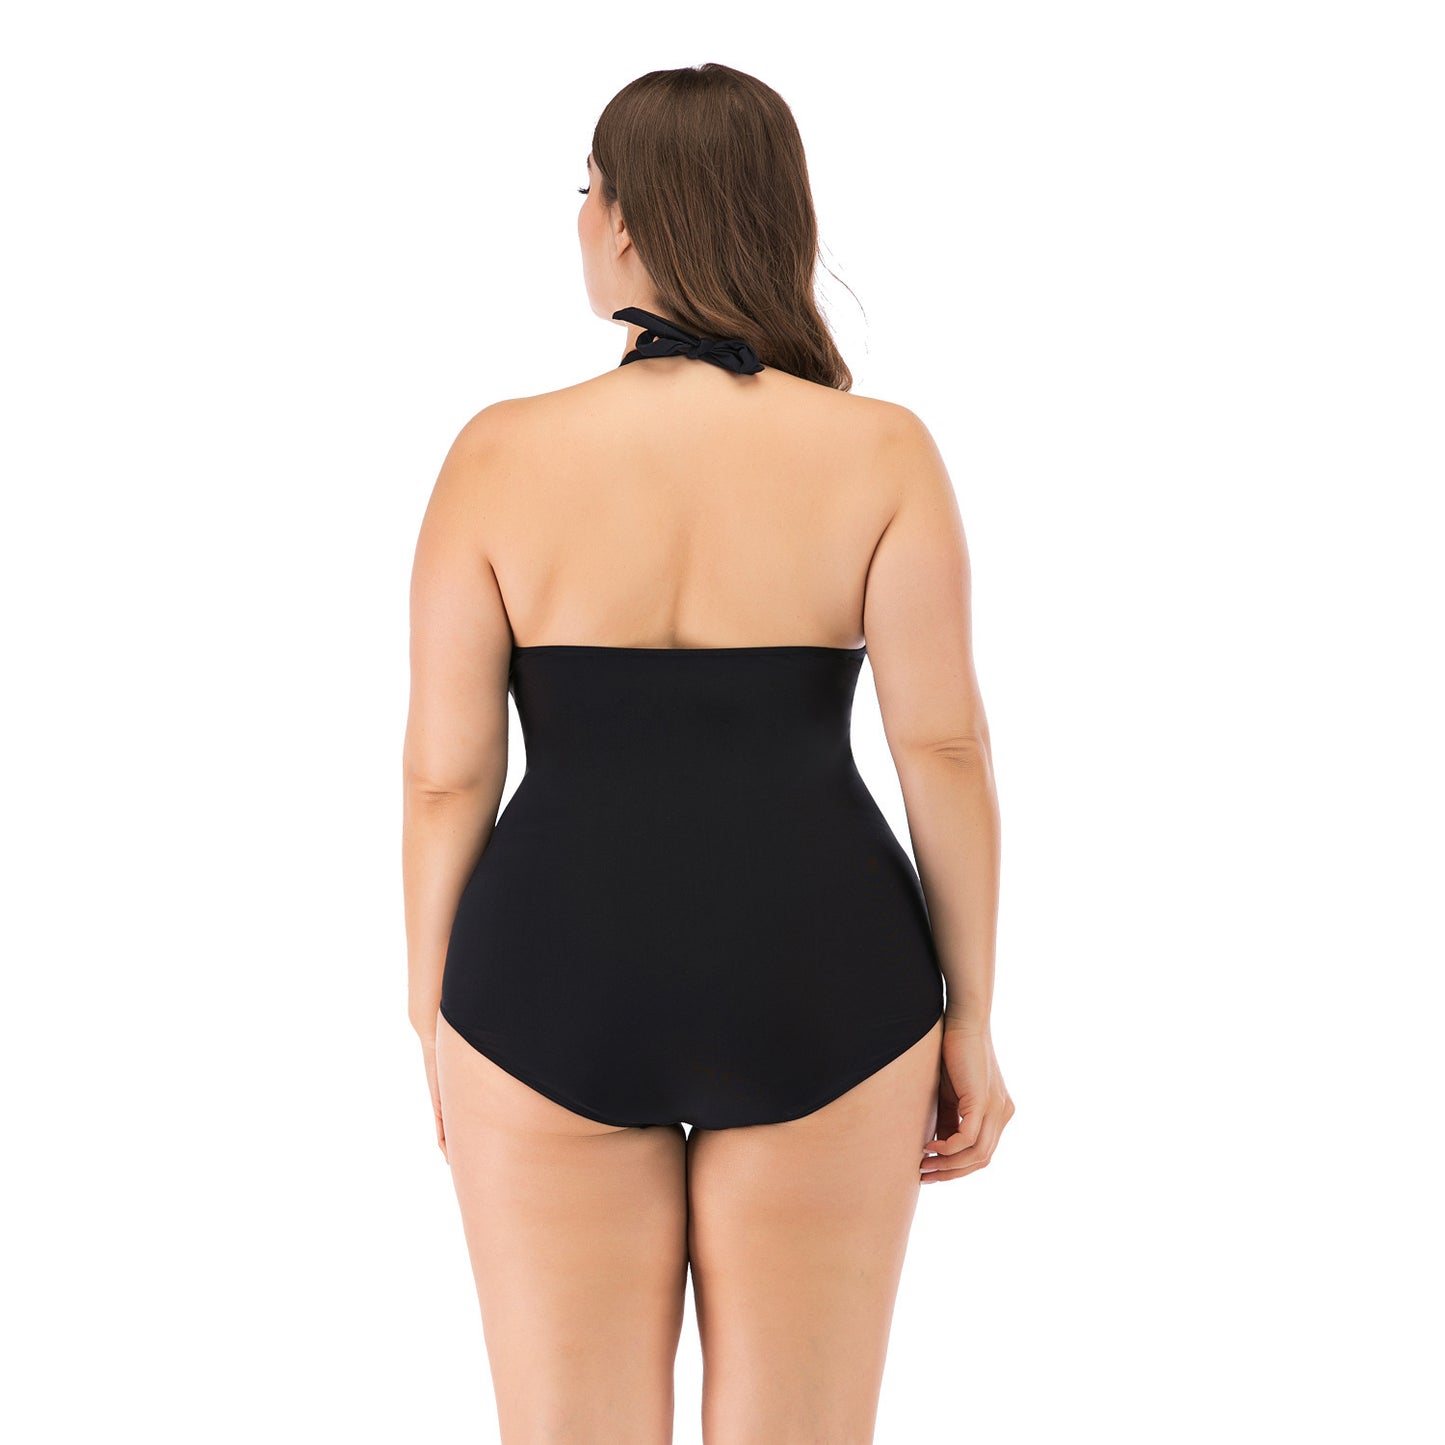 Plus Size Sexy Swimsuit